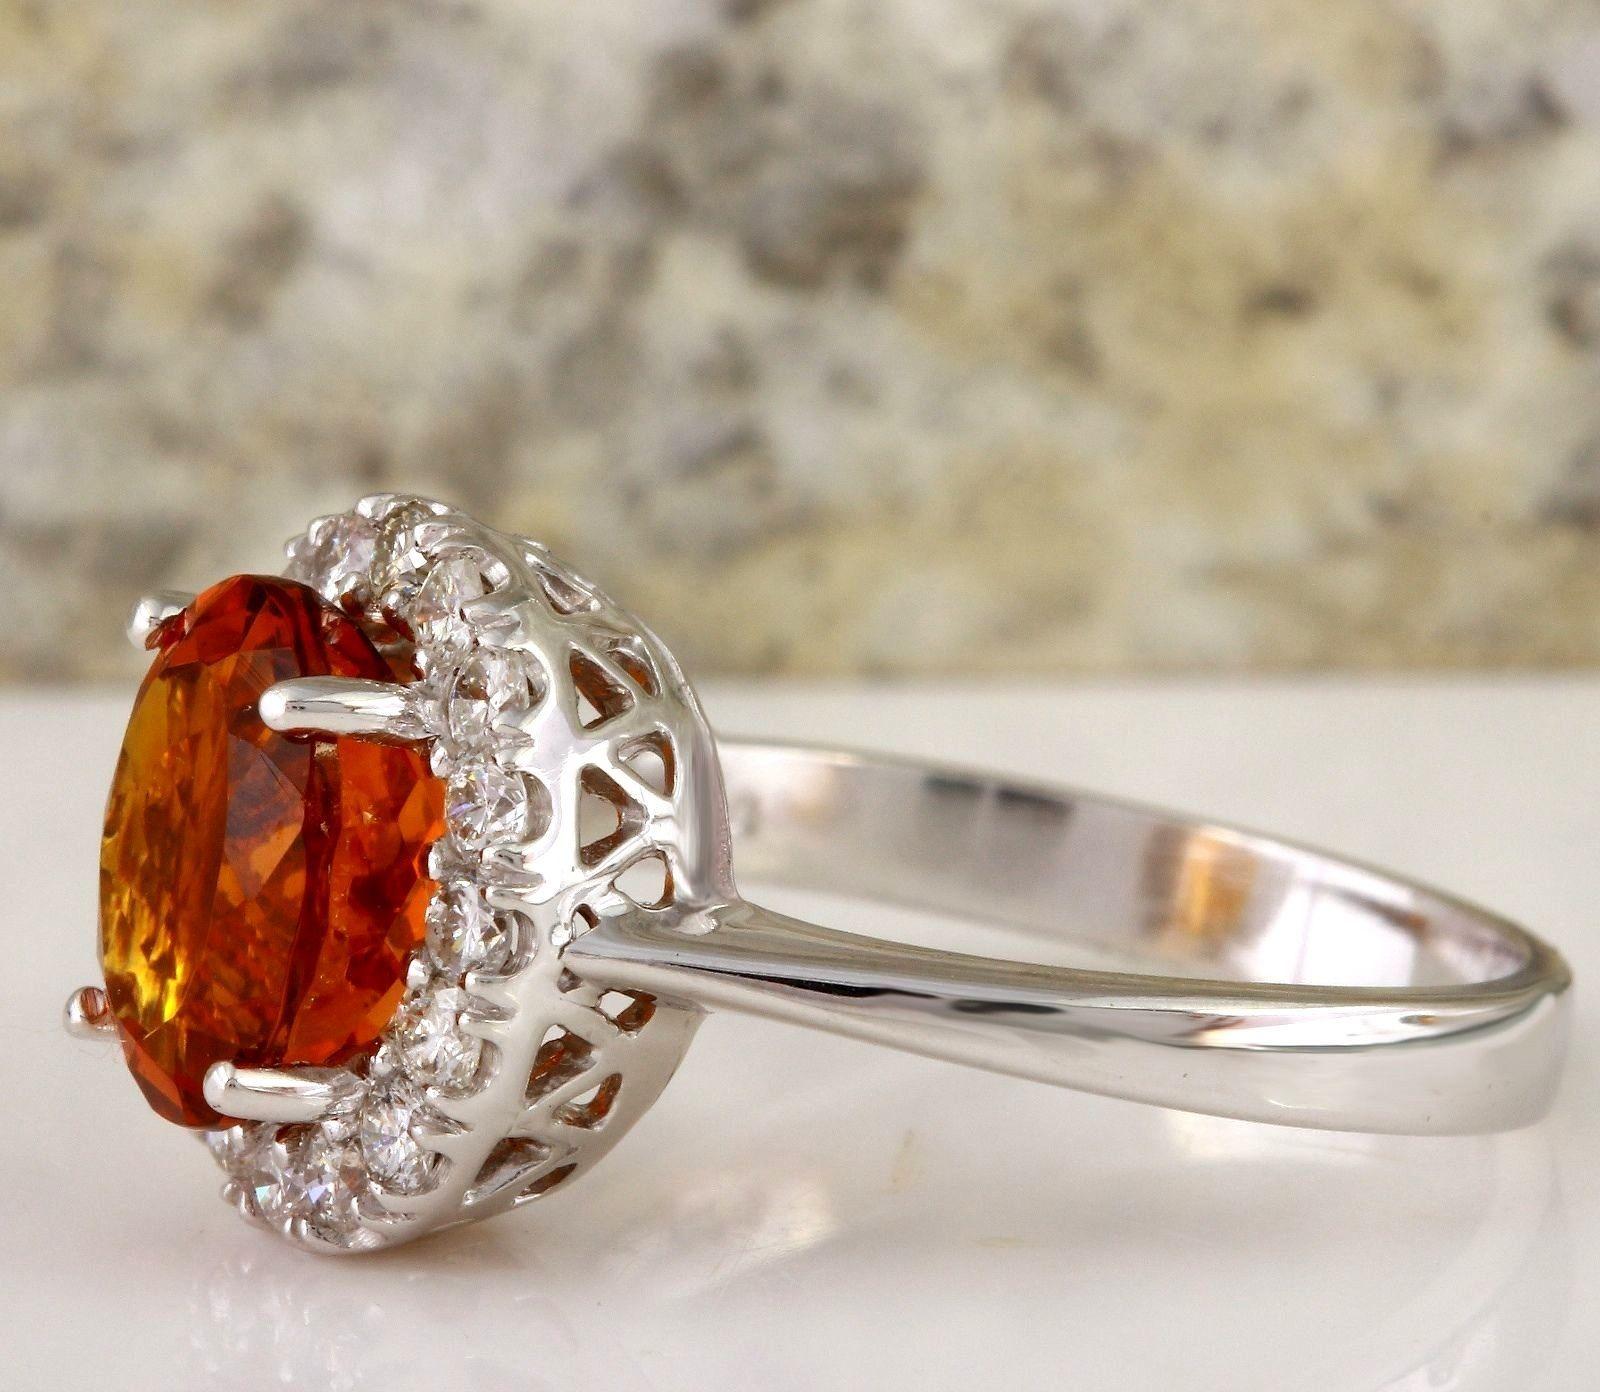 2.55 Carats Exquisite Natural Madeira Citrine and Diamond 14K Solid White Gold Ring

Total Natural Citrine Weight is: Approx. 2.00 Carats

Citrine Measures: Approx. 8.93 x 6.85mm

Natural Round Diamonds Weight: Approx. 0.55 Carats (color G-H /